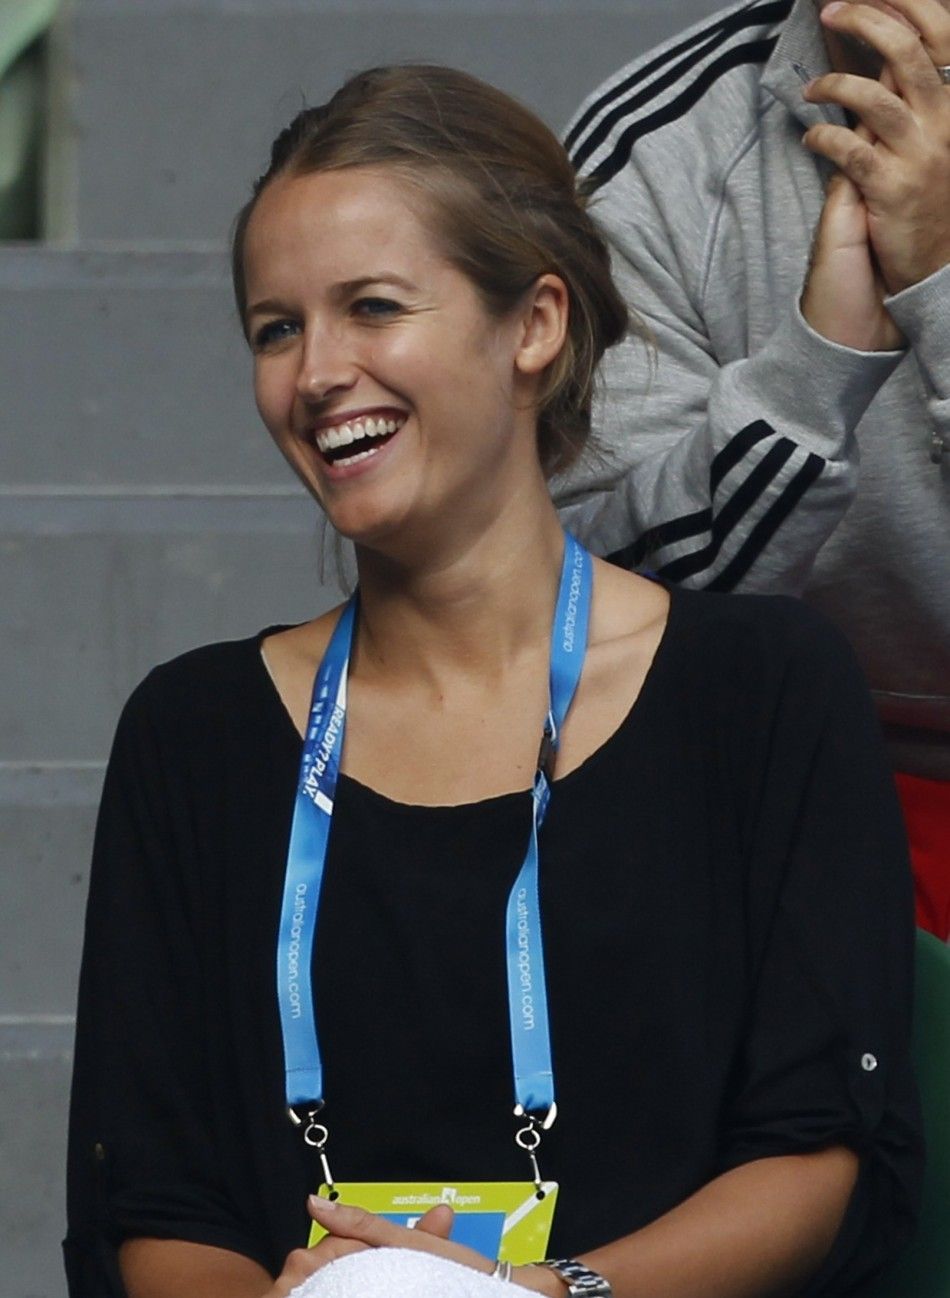 Kim Sears, girlfriend of Murray of Britain, watches his quarter-final match against Nishikori of Japan at the Australian Open tennis tournament in Melbourne